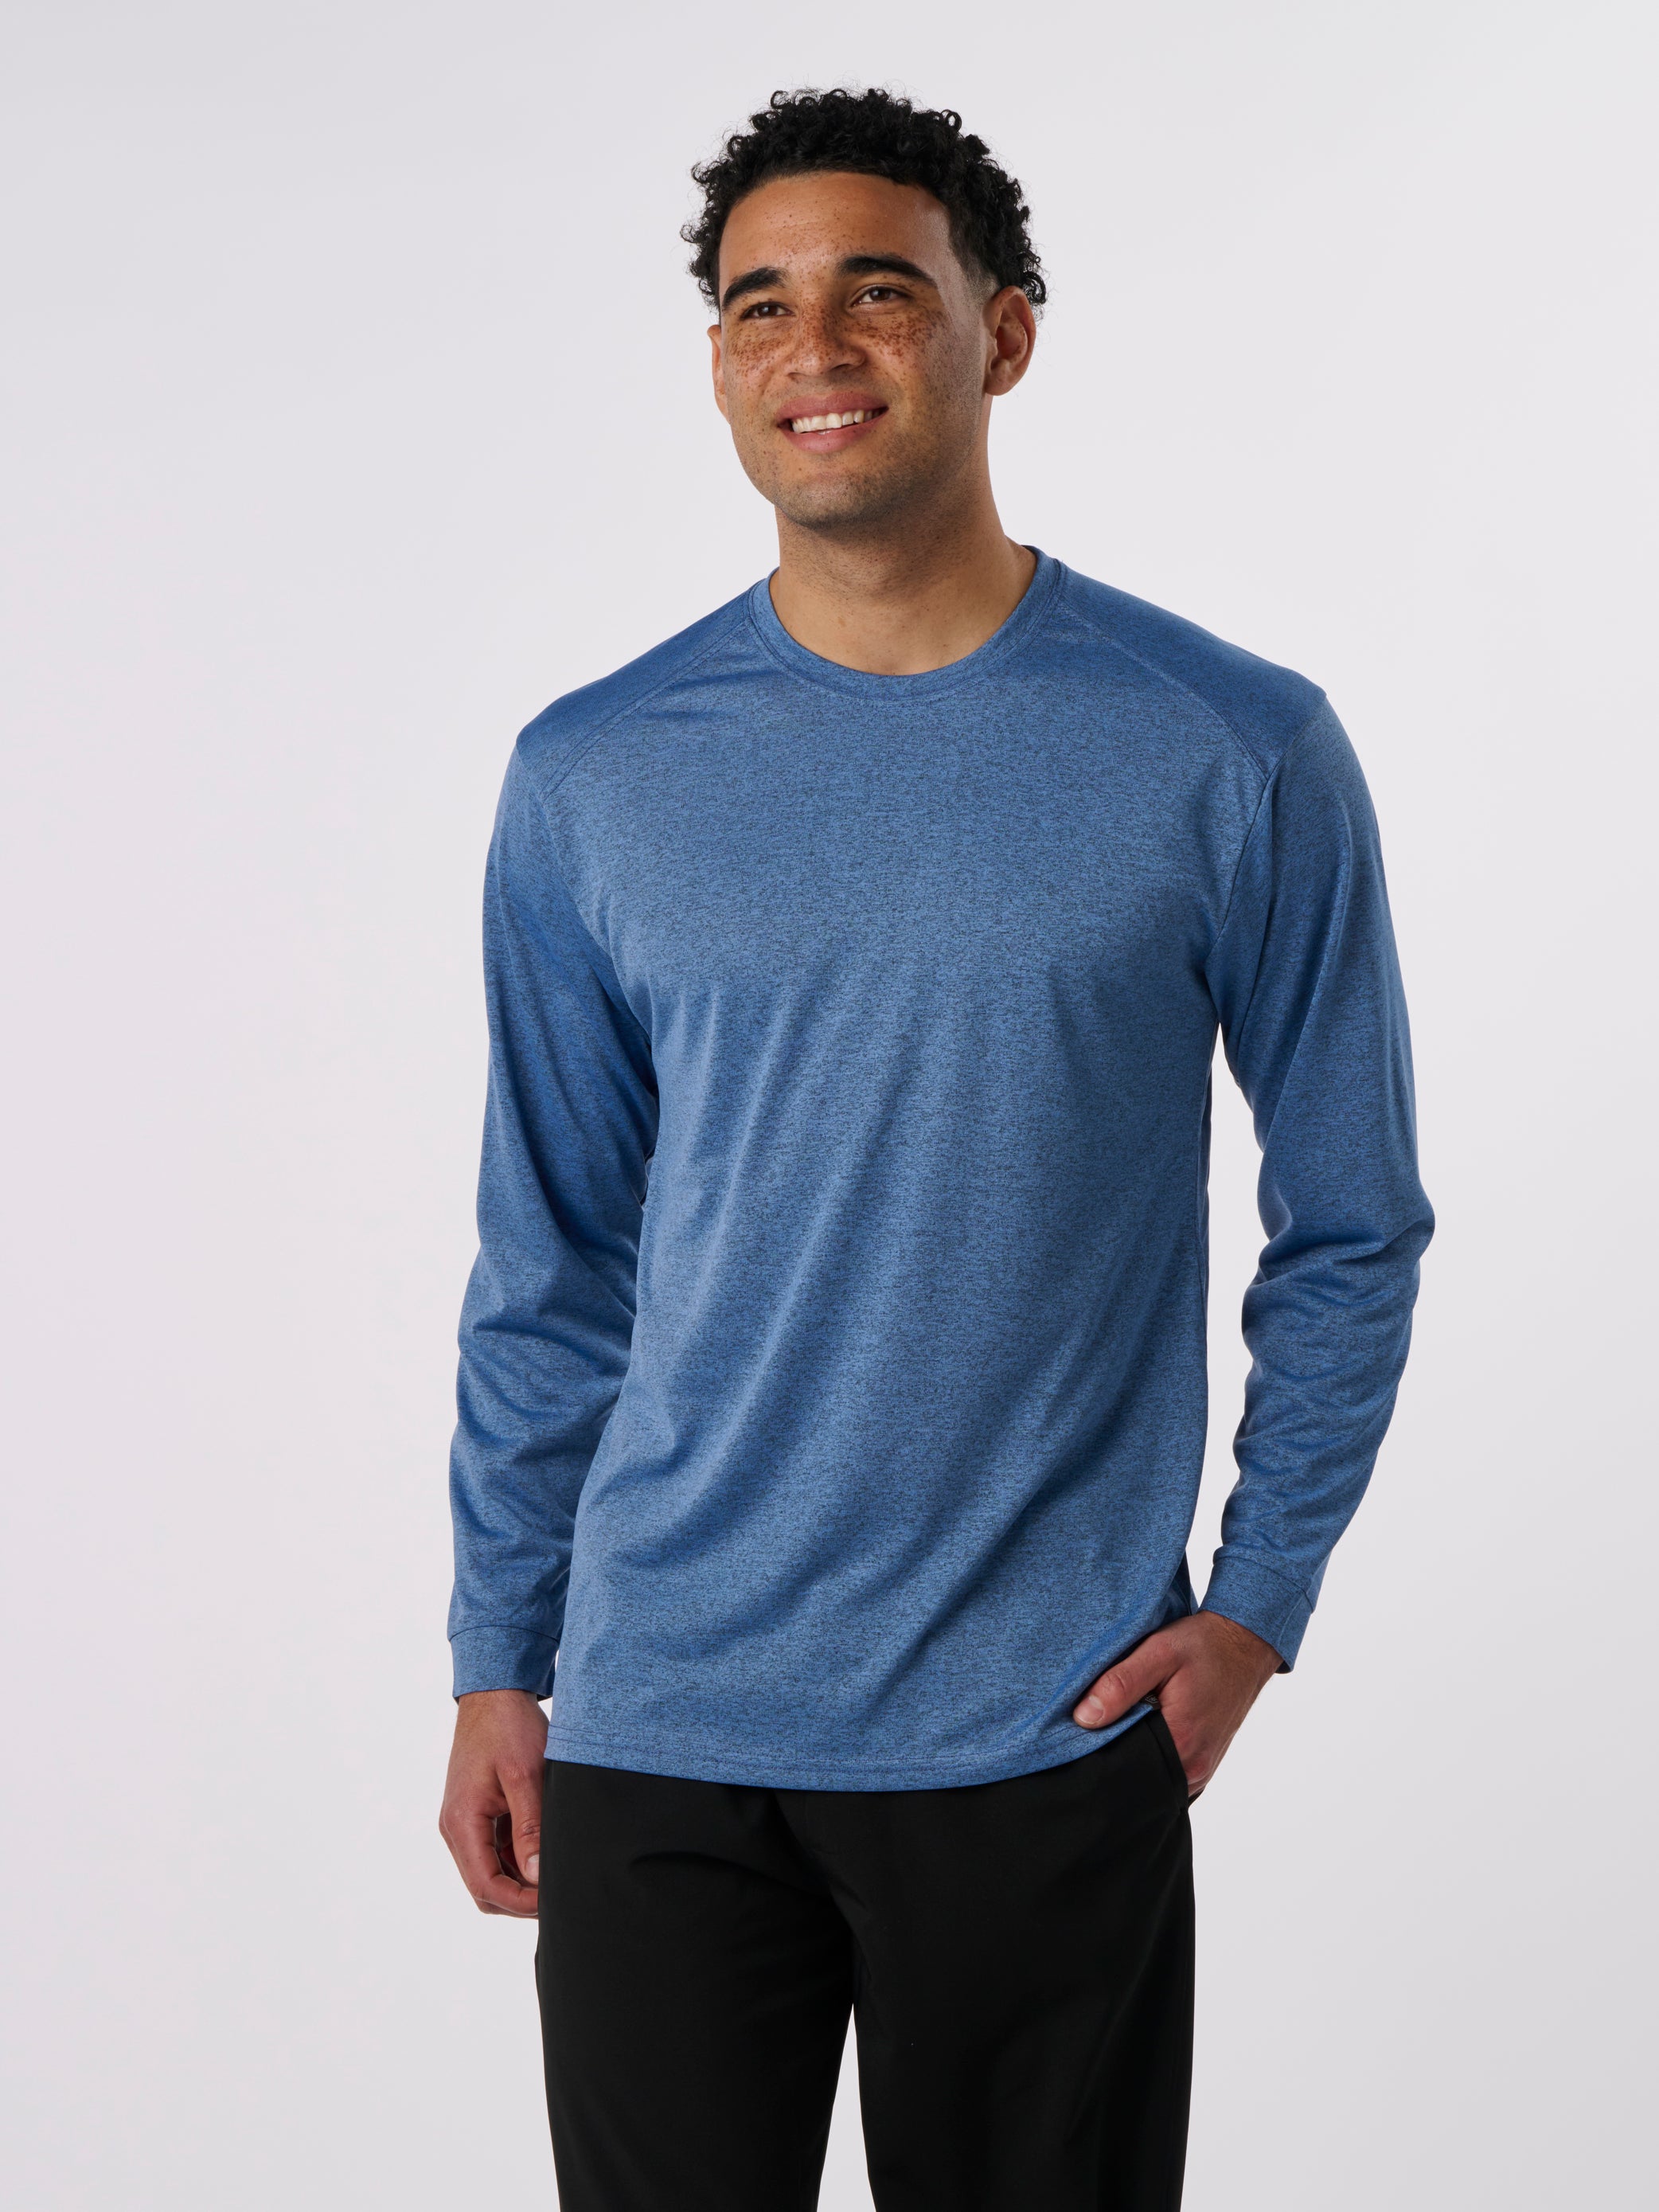 RECOVER_RD1001_SPORTLONGSLEEVETSHIRT_BLUEHEATHER_FRONT.jpg